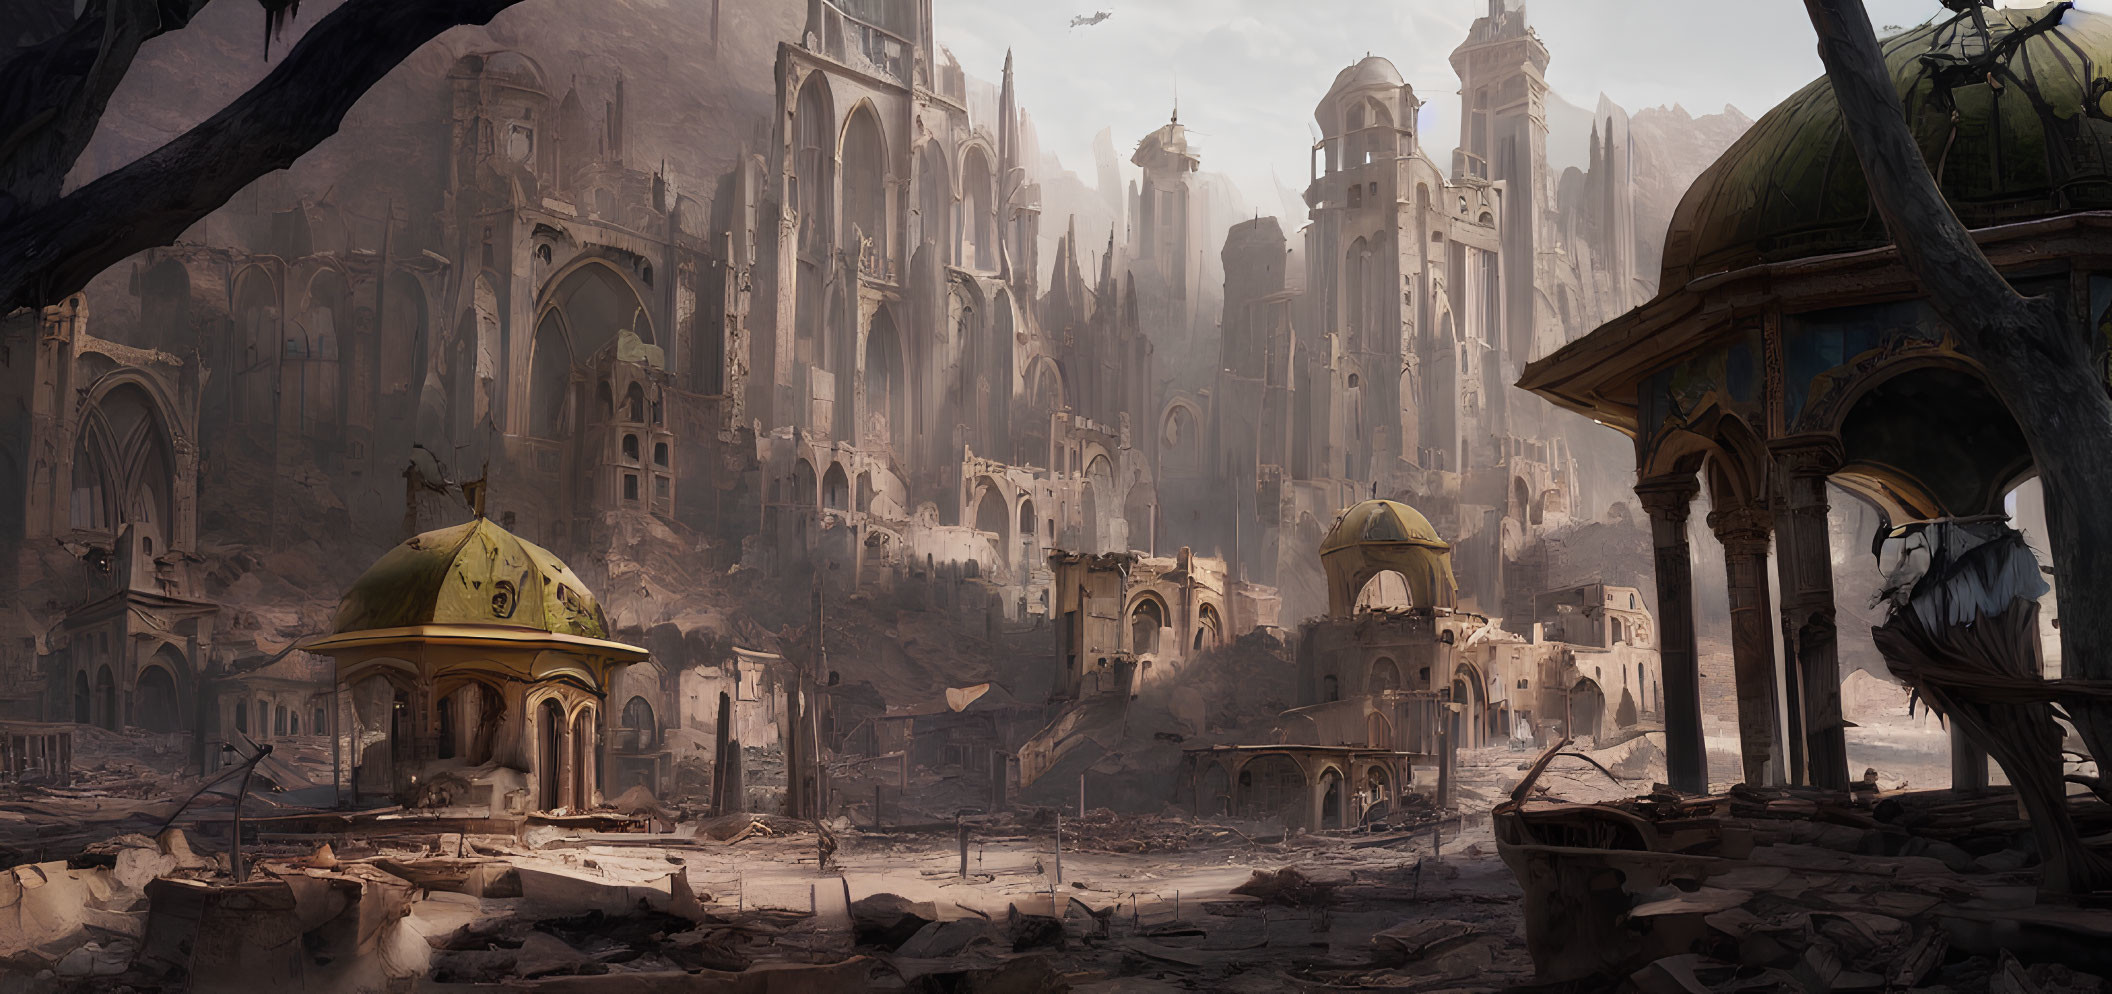 Ruined city with gothic architecture and domed structures